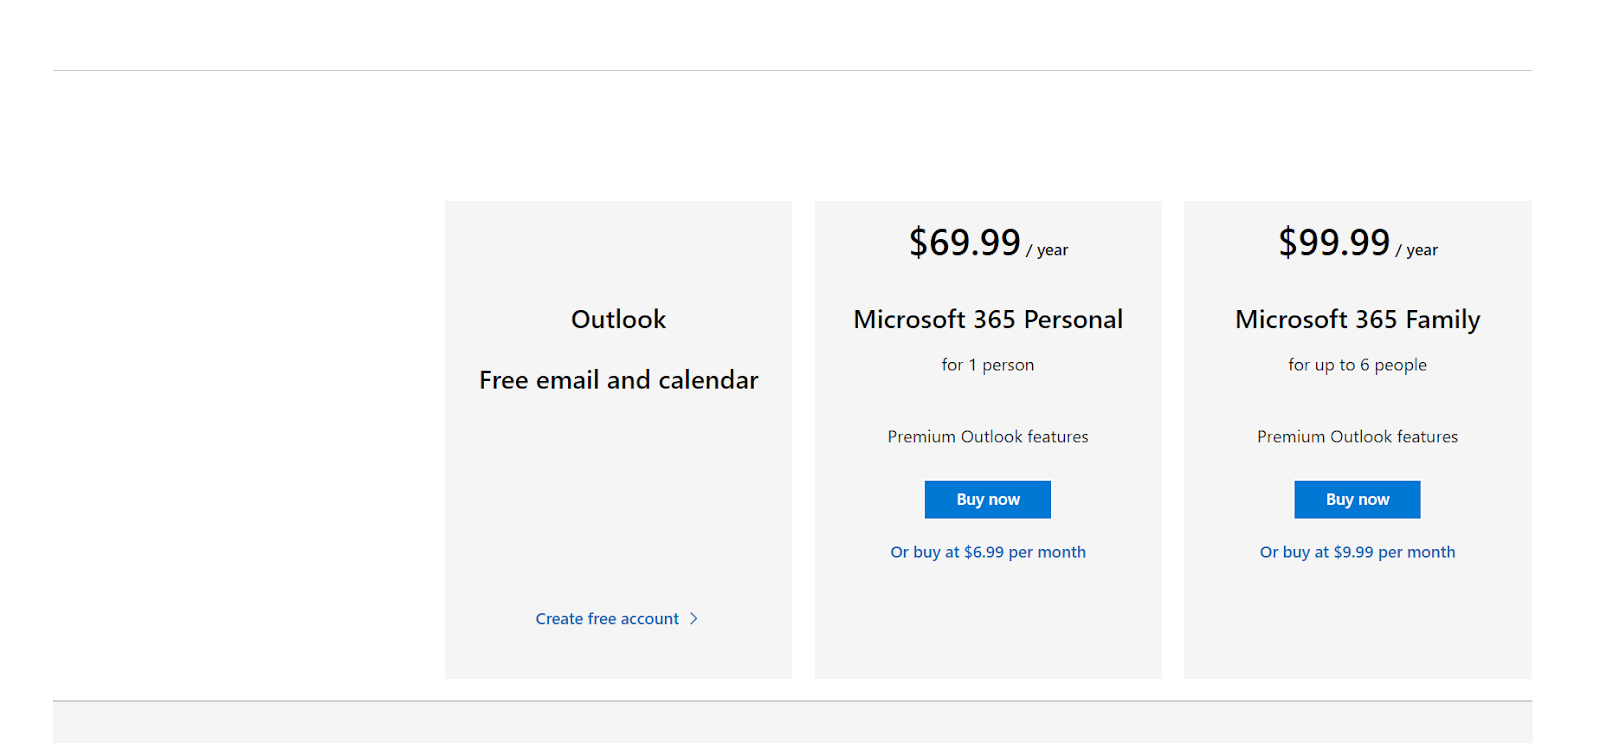 Microsoft Outlook prices